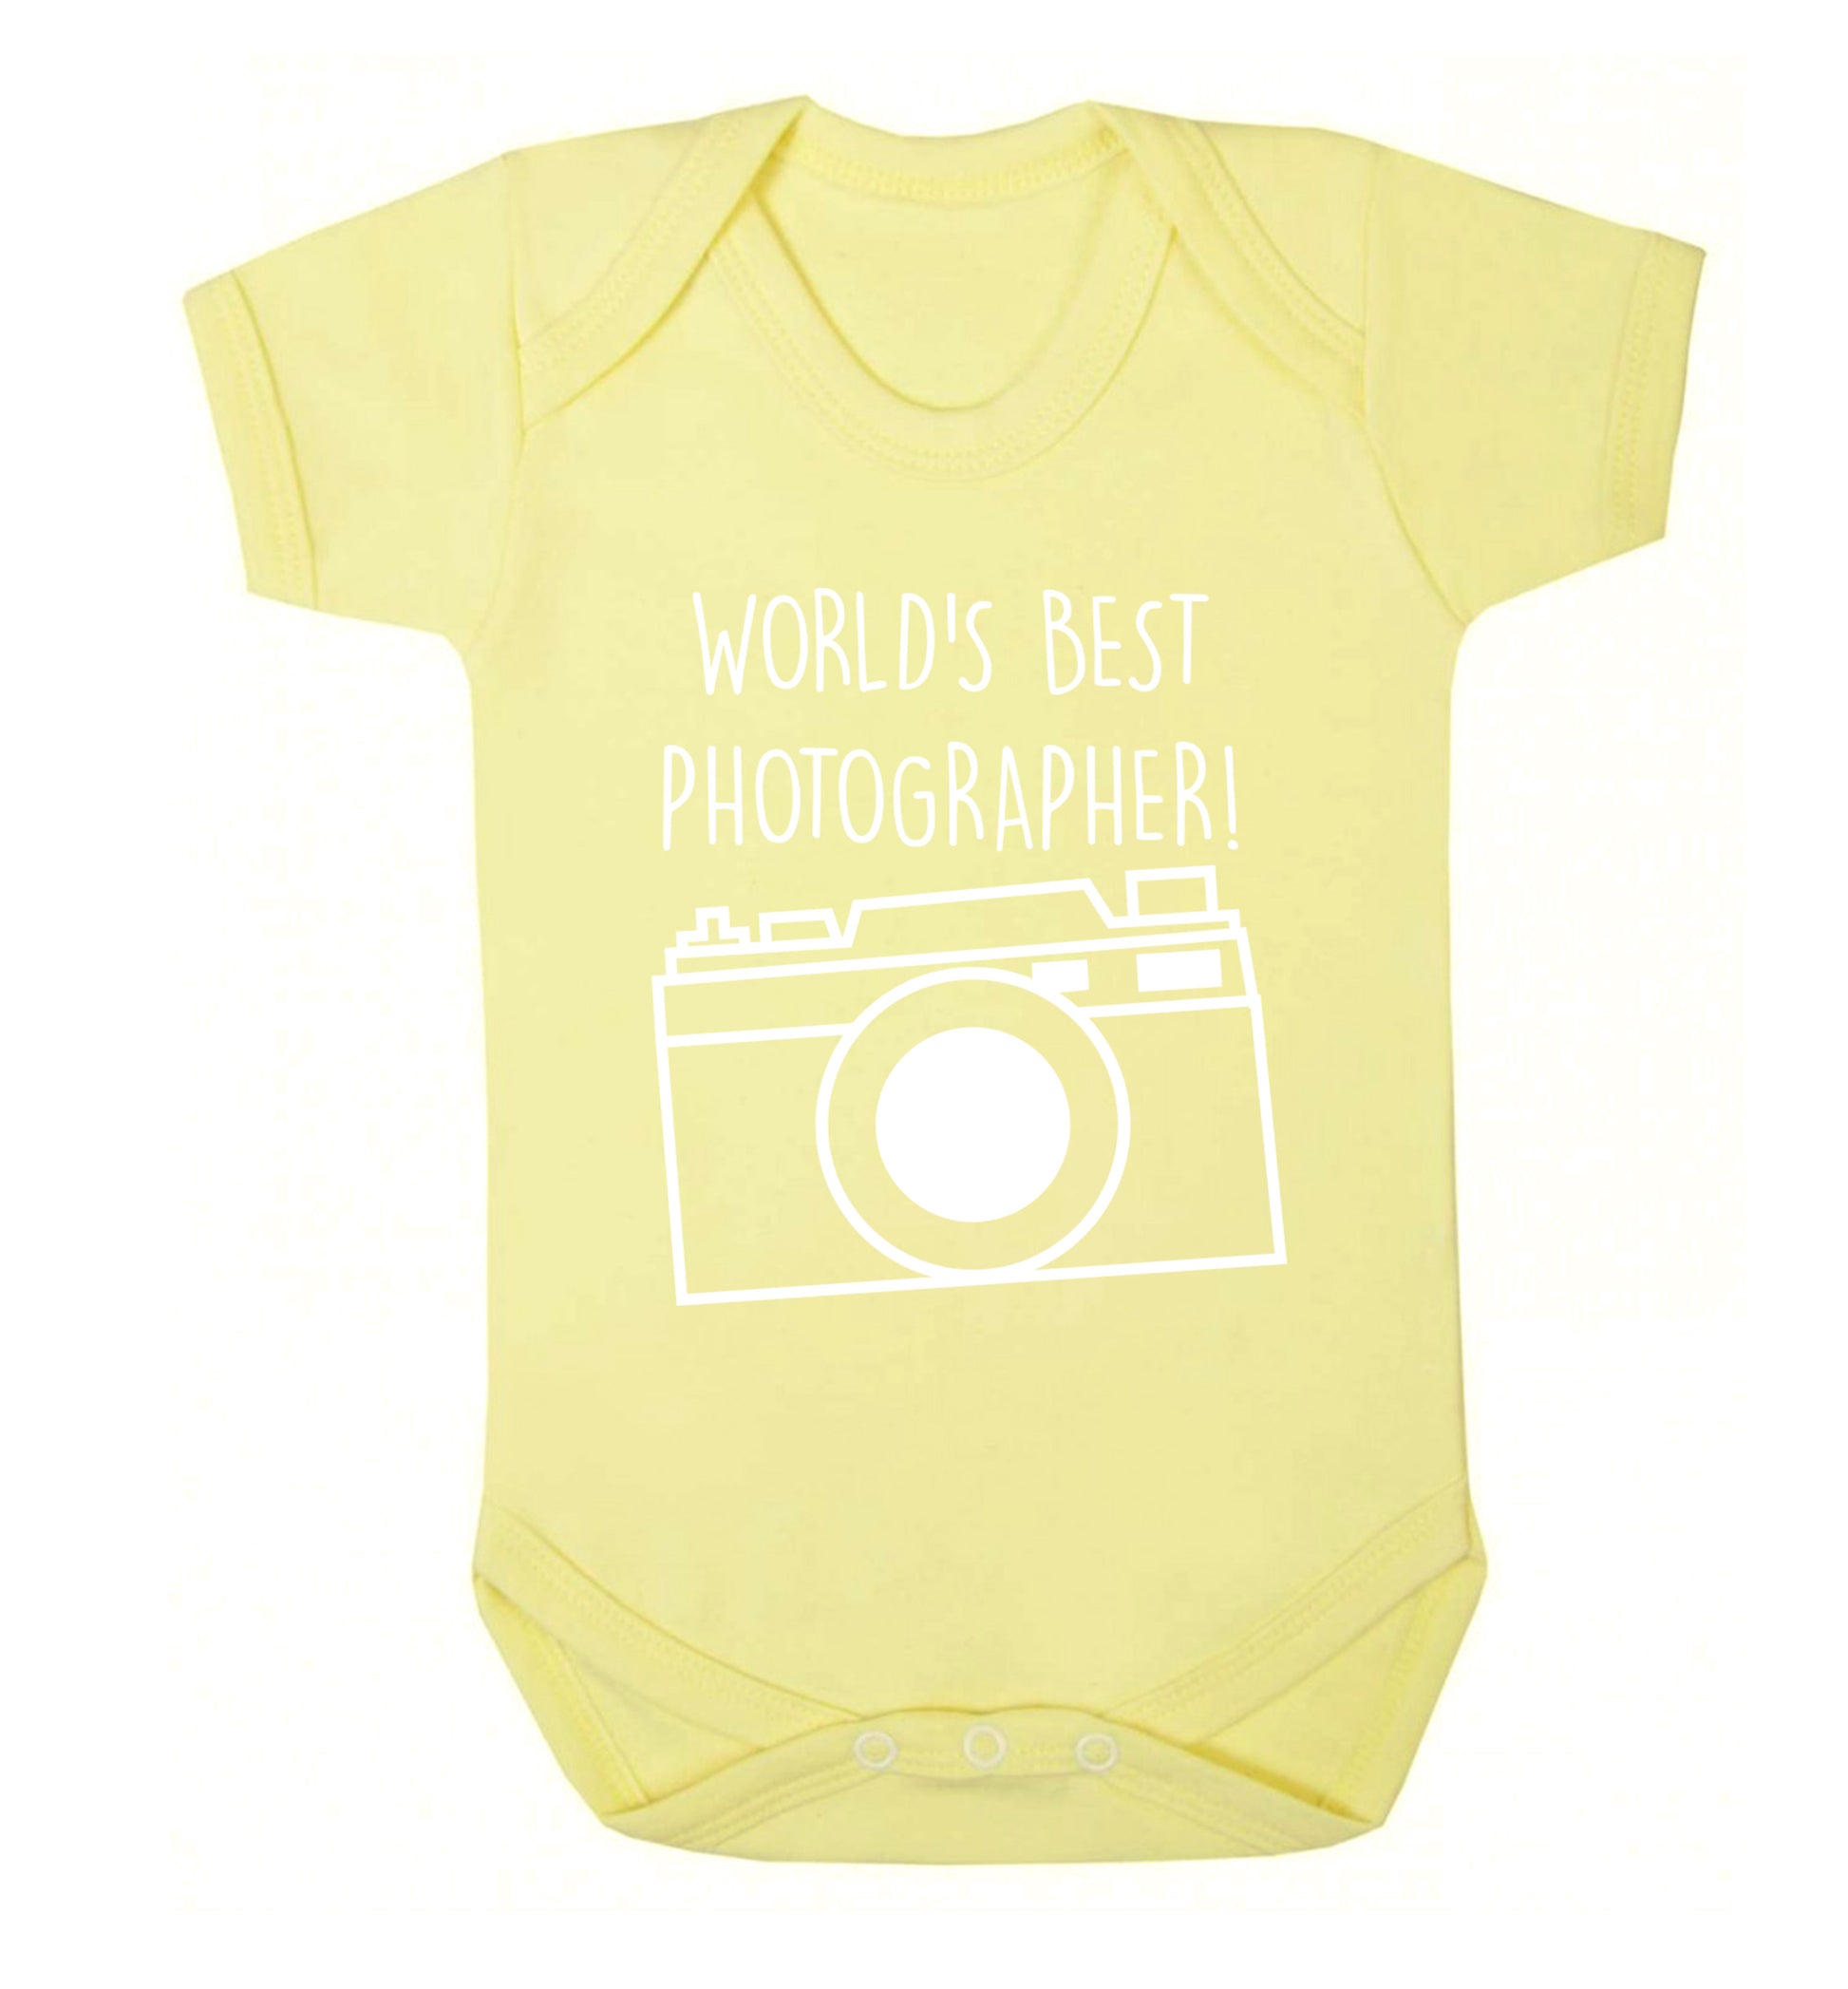 Worlds best photographer  Baby Vest pale yellow 18-24 months